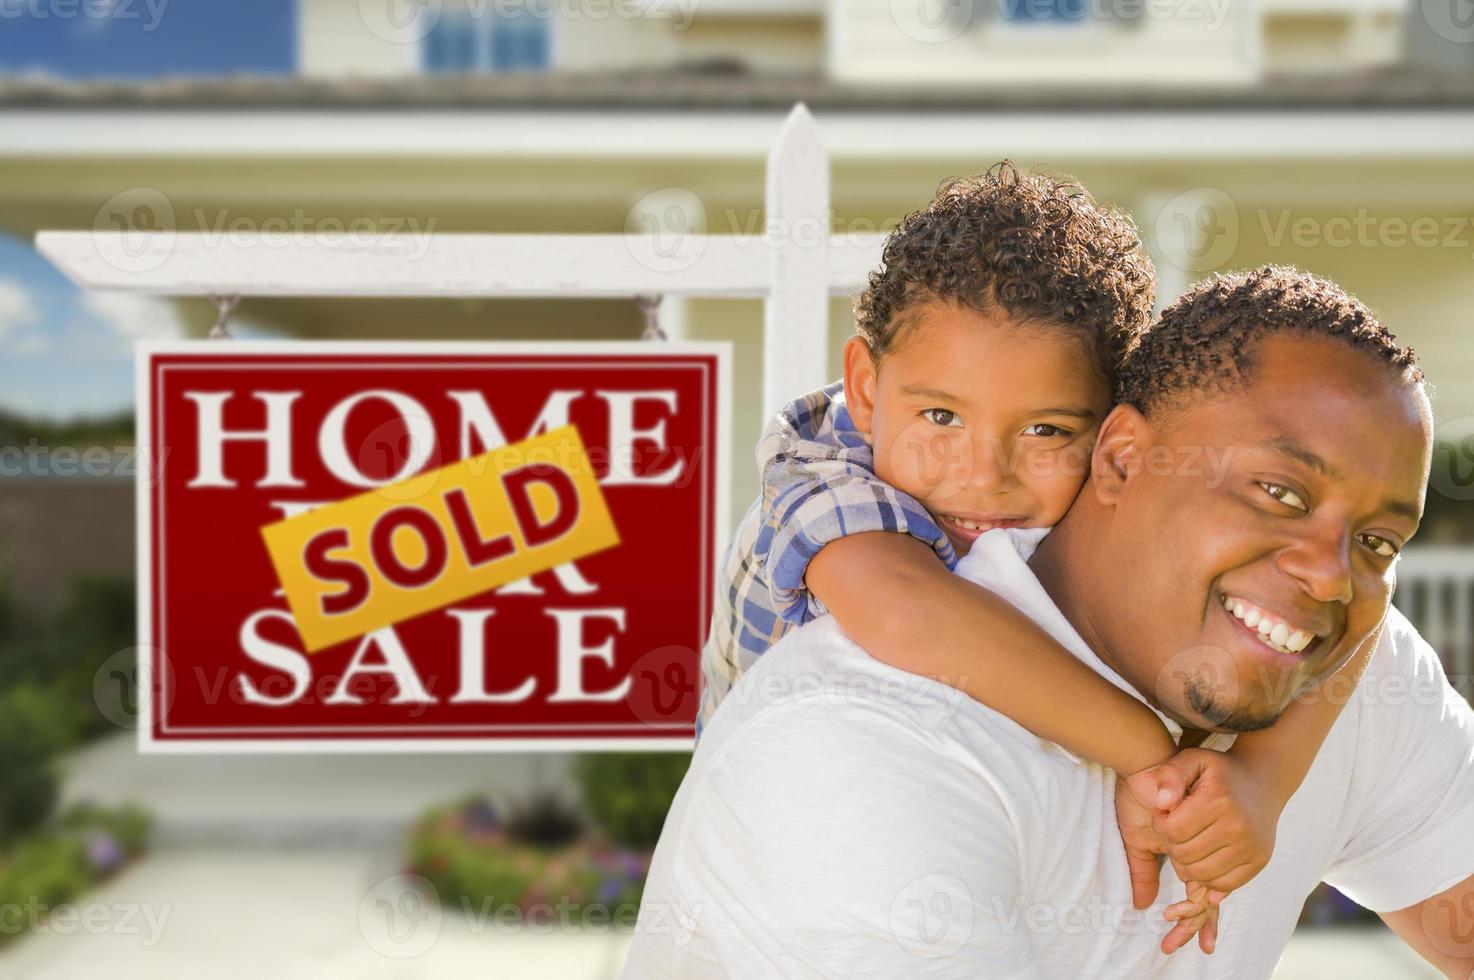 Mixed Race Father and Son In Front of Real Estate Sign and House photo